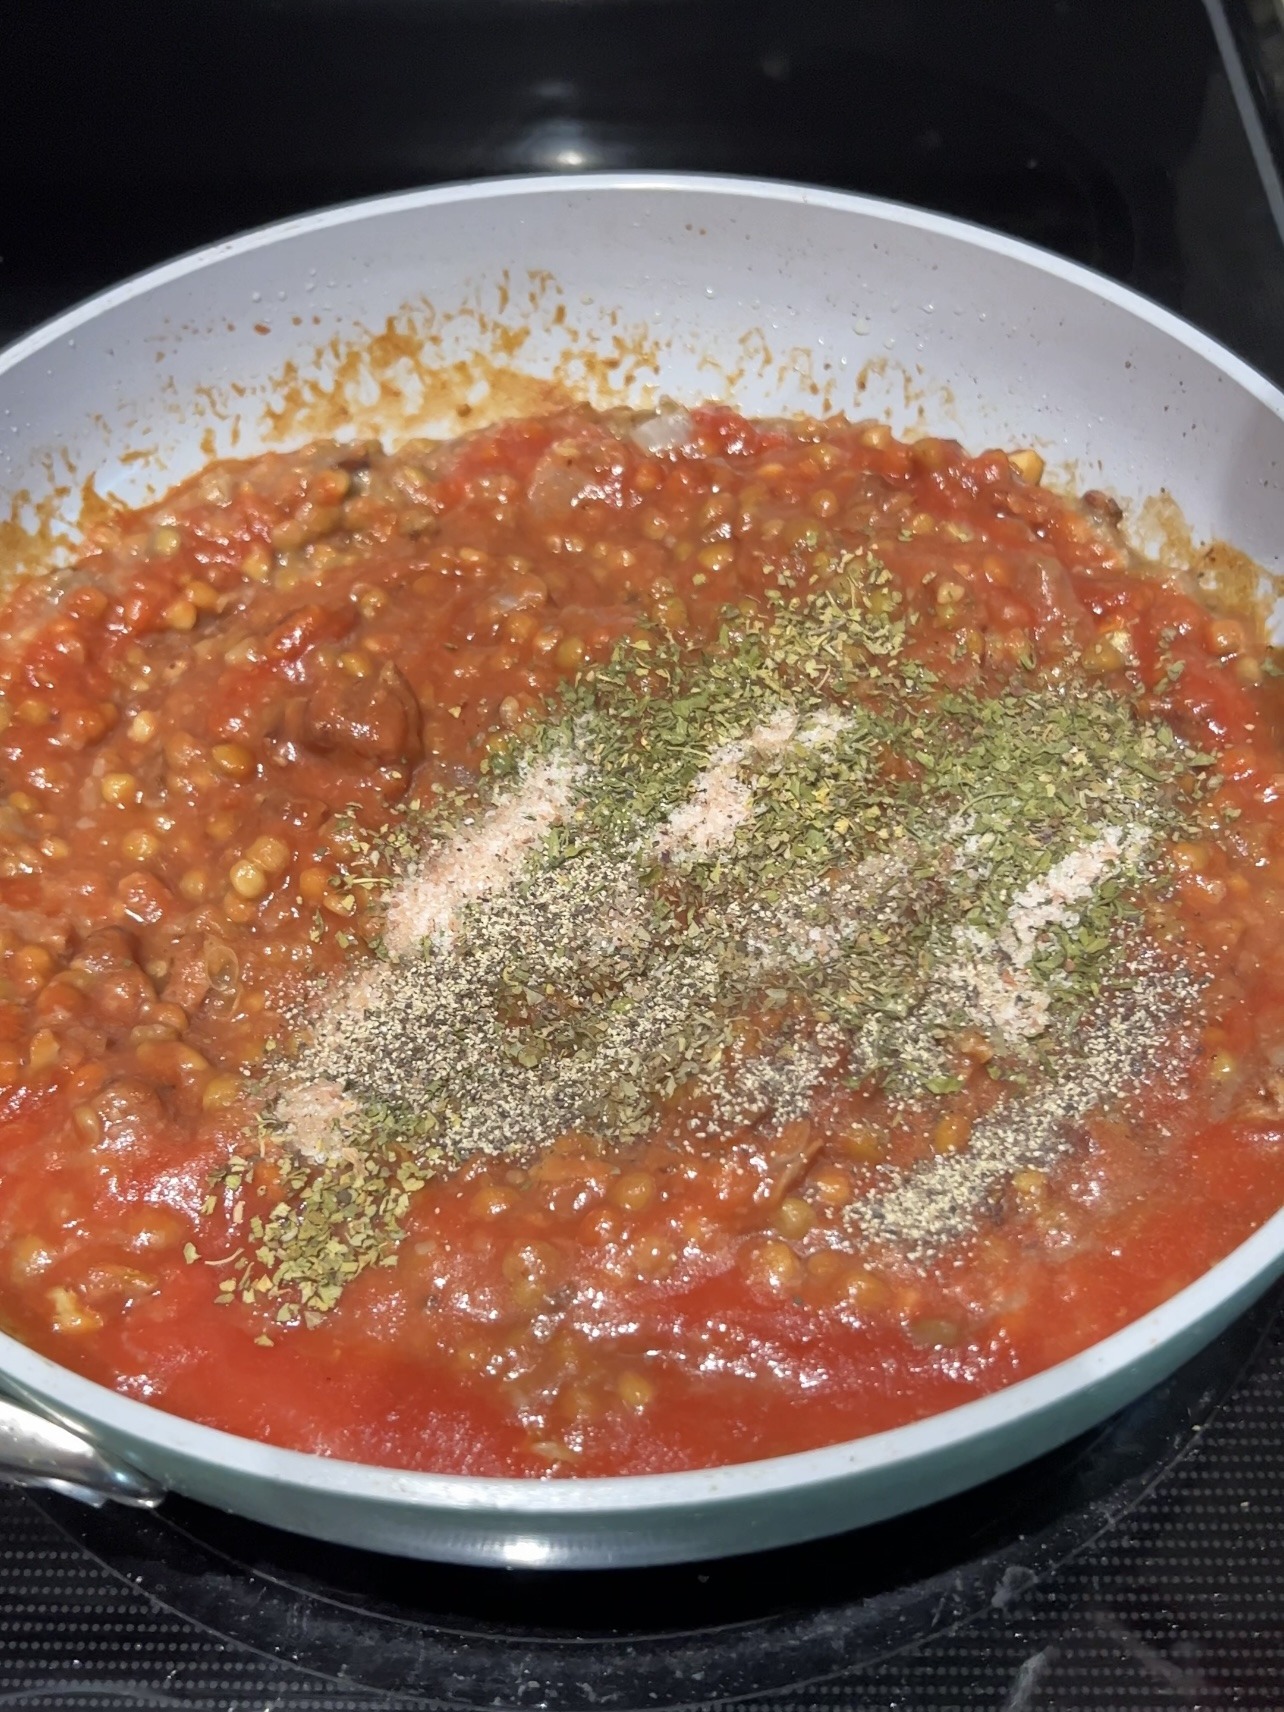 Step 3: Add the tomato sauce and spices, stir, and cook until the tomato sauce bubbles. Then, reduce the heat to a low simmer. Cook covered for 20 minutes.